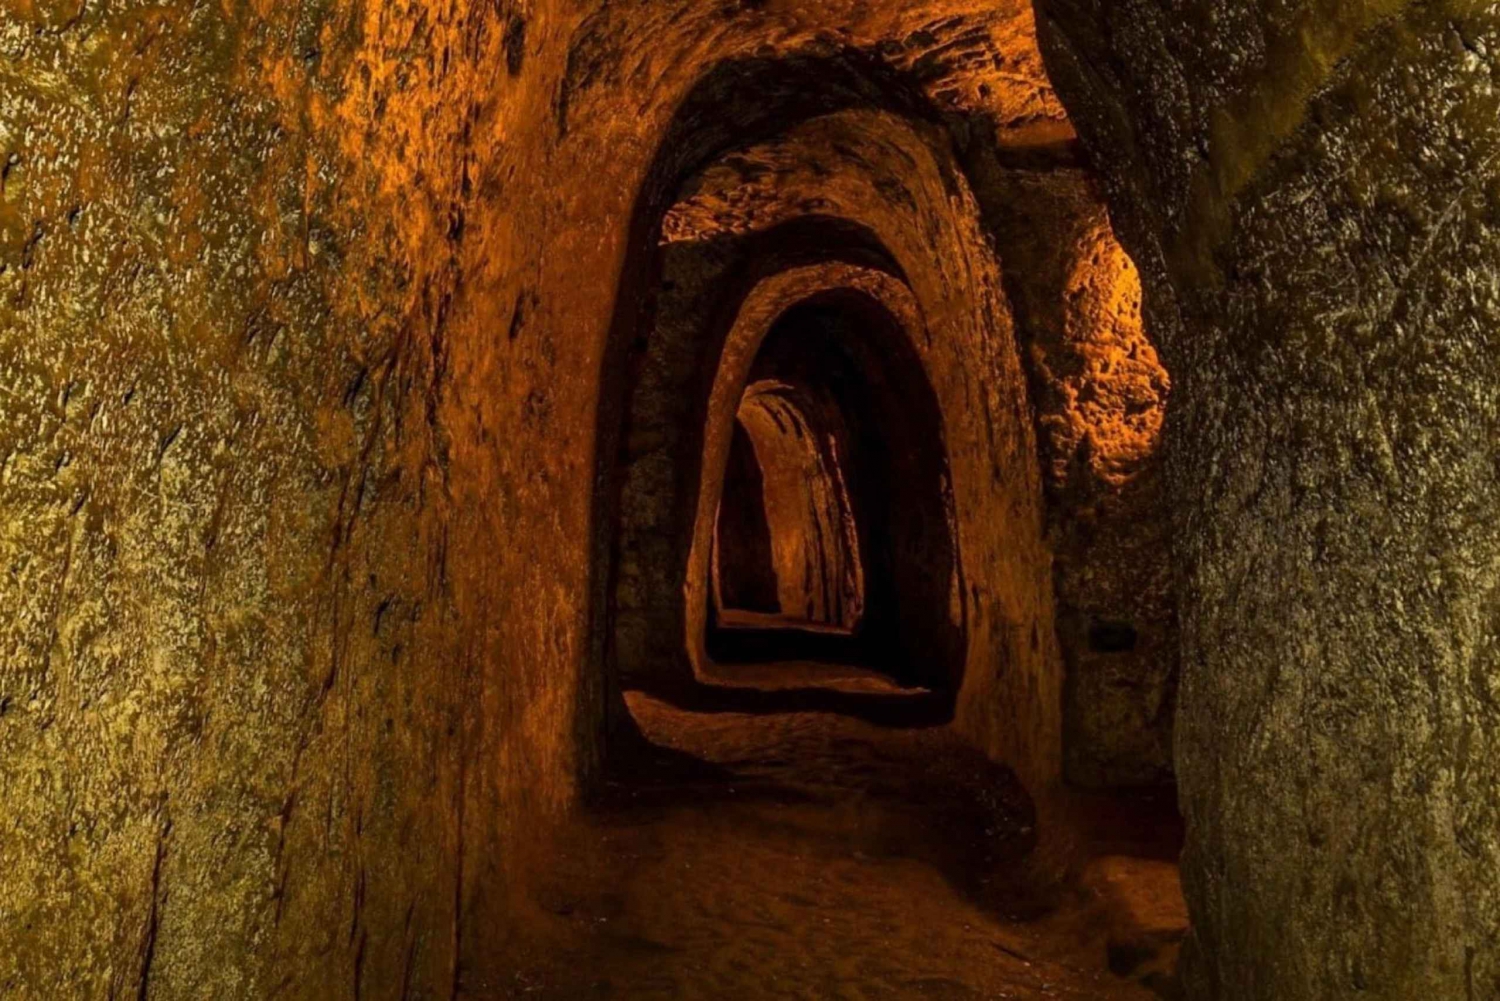 From Ho Chi Minh: Cu Chi Tunnels - Vietnamese history